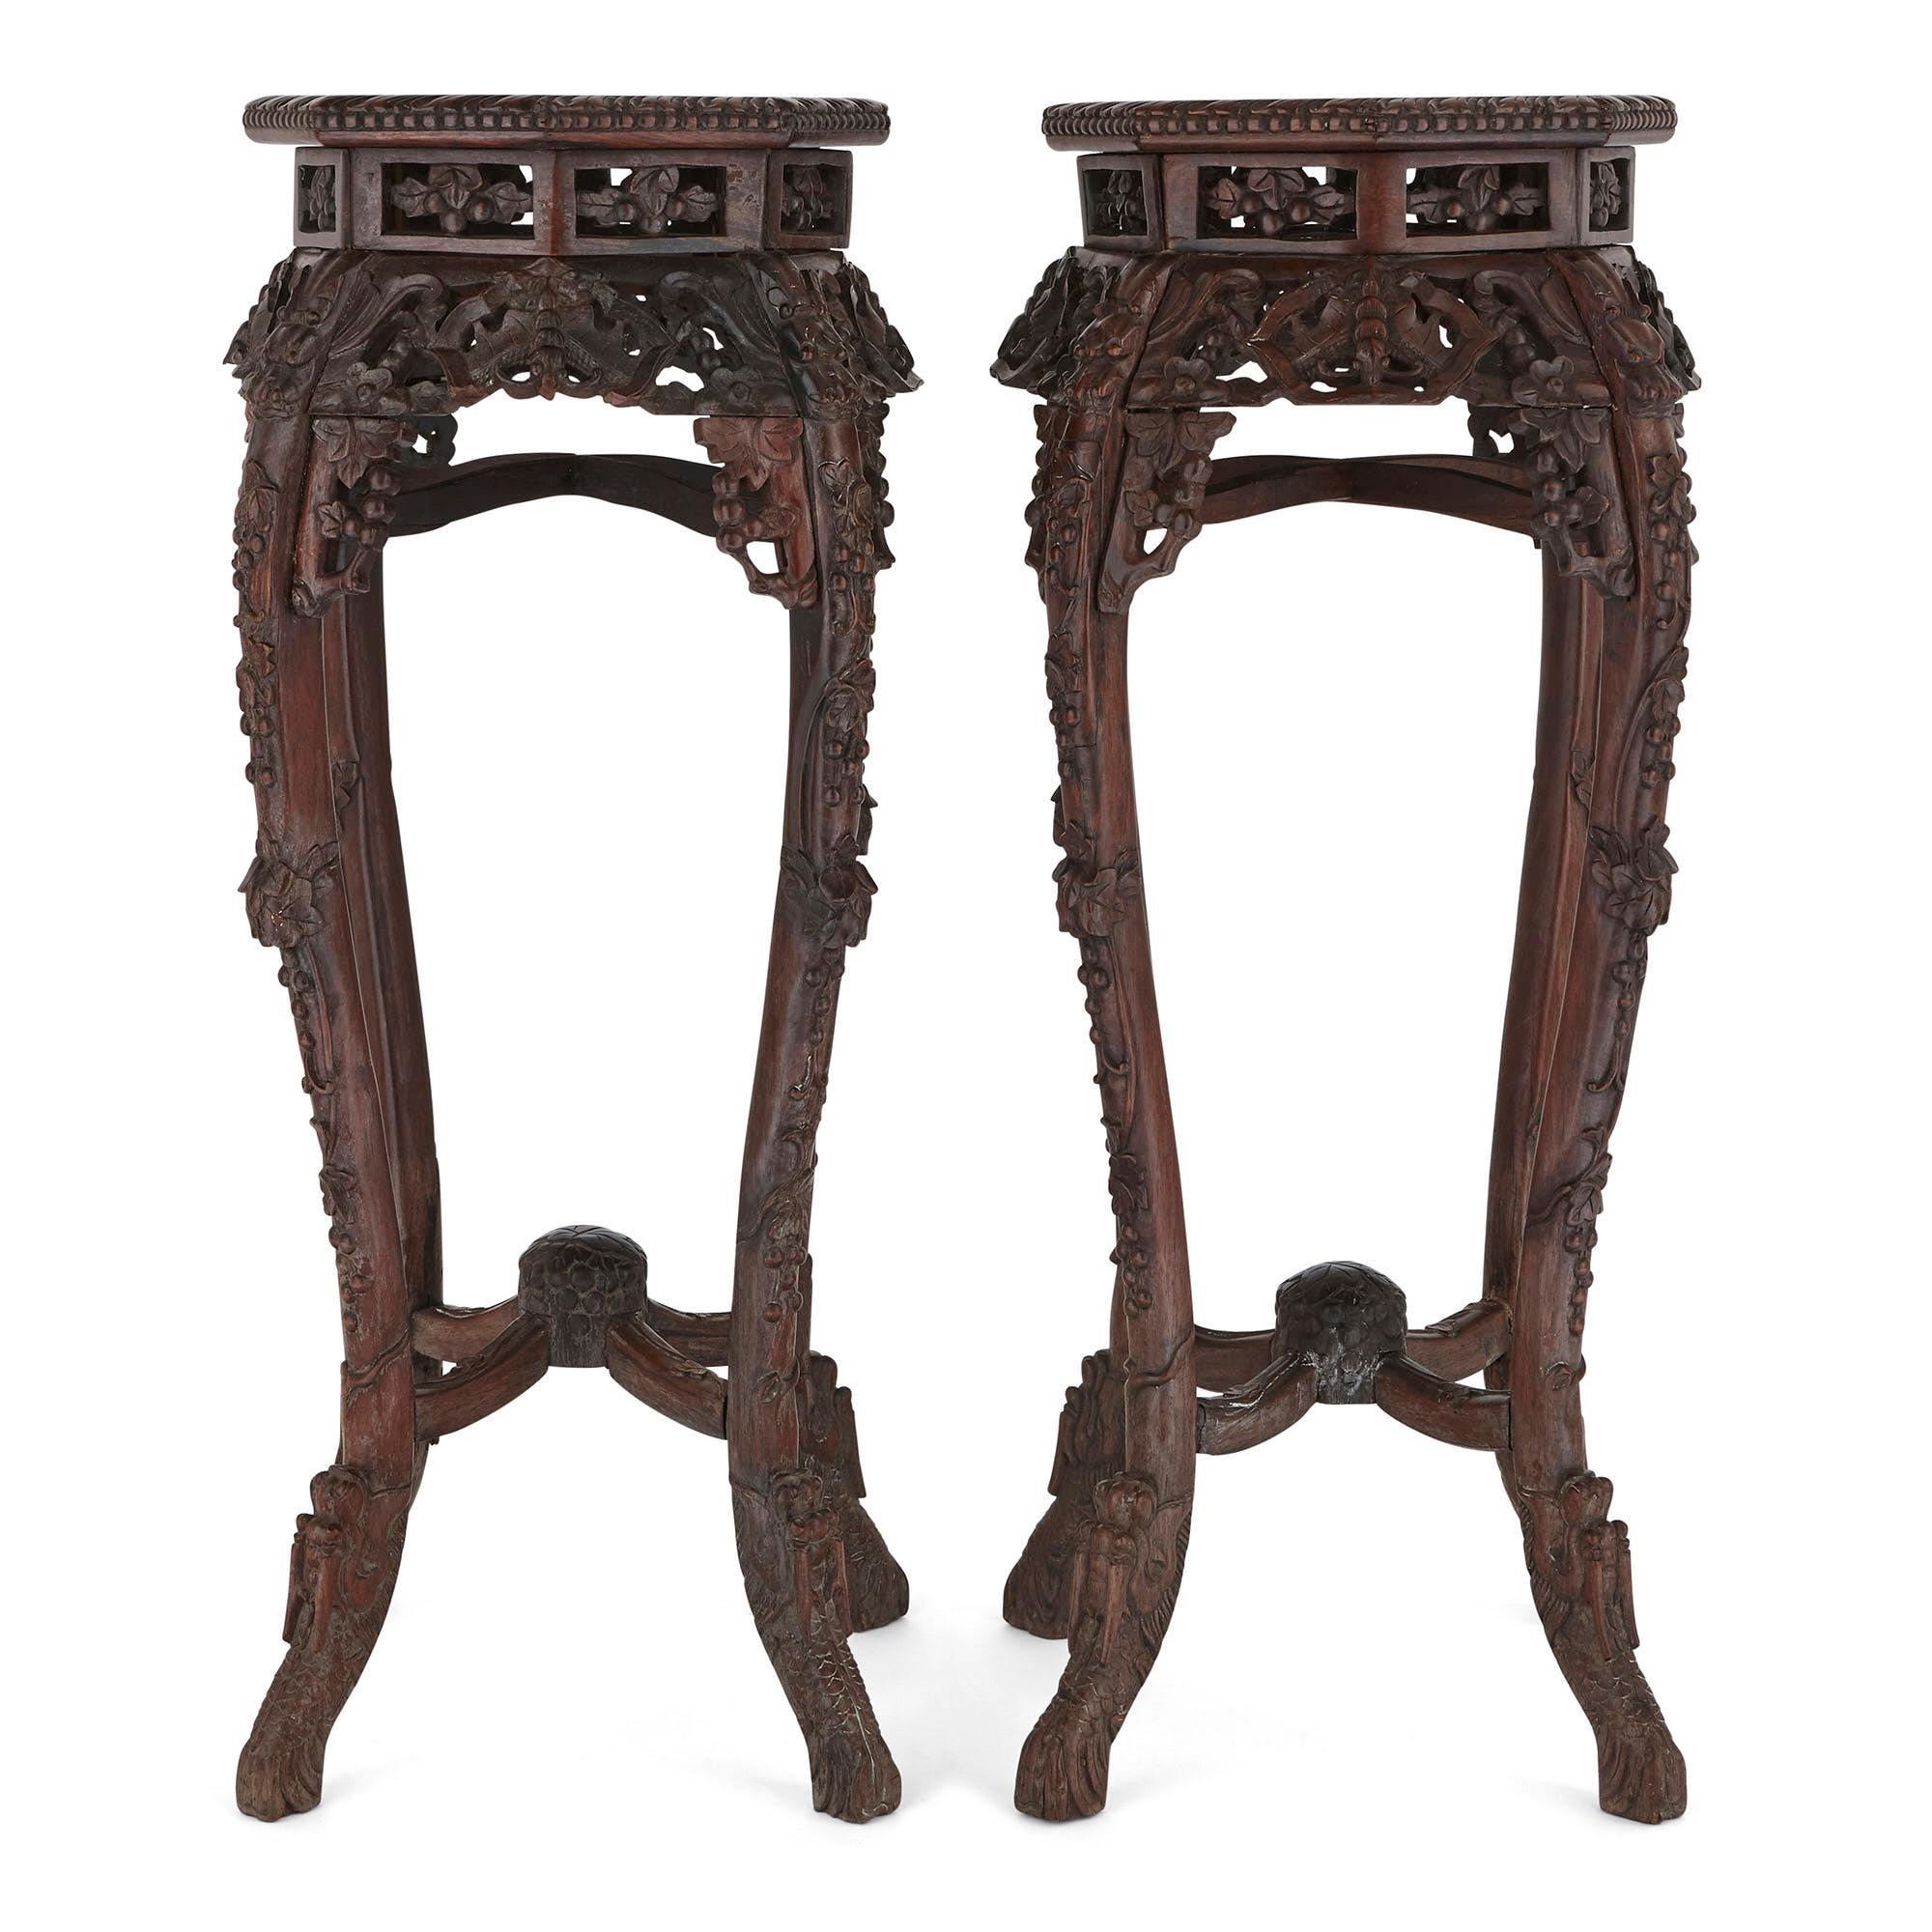 The stands in this matching pair are made from 'Hongmu' wood (Chinese hardwood). Each stand rests upon four stylised and flared dragon feet, which extend into four ornately carved cabriole legs. The legs are connected by upper and lower stretchers,